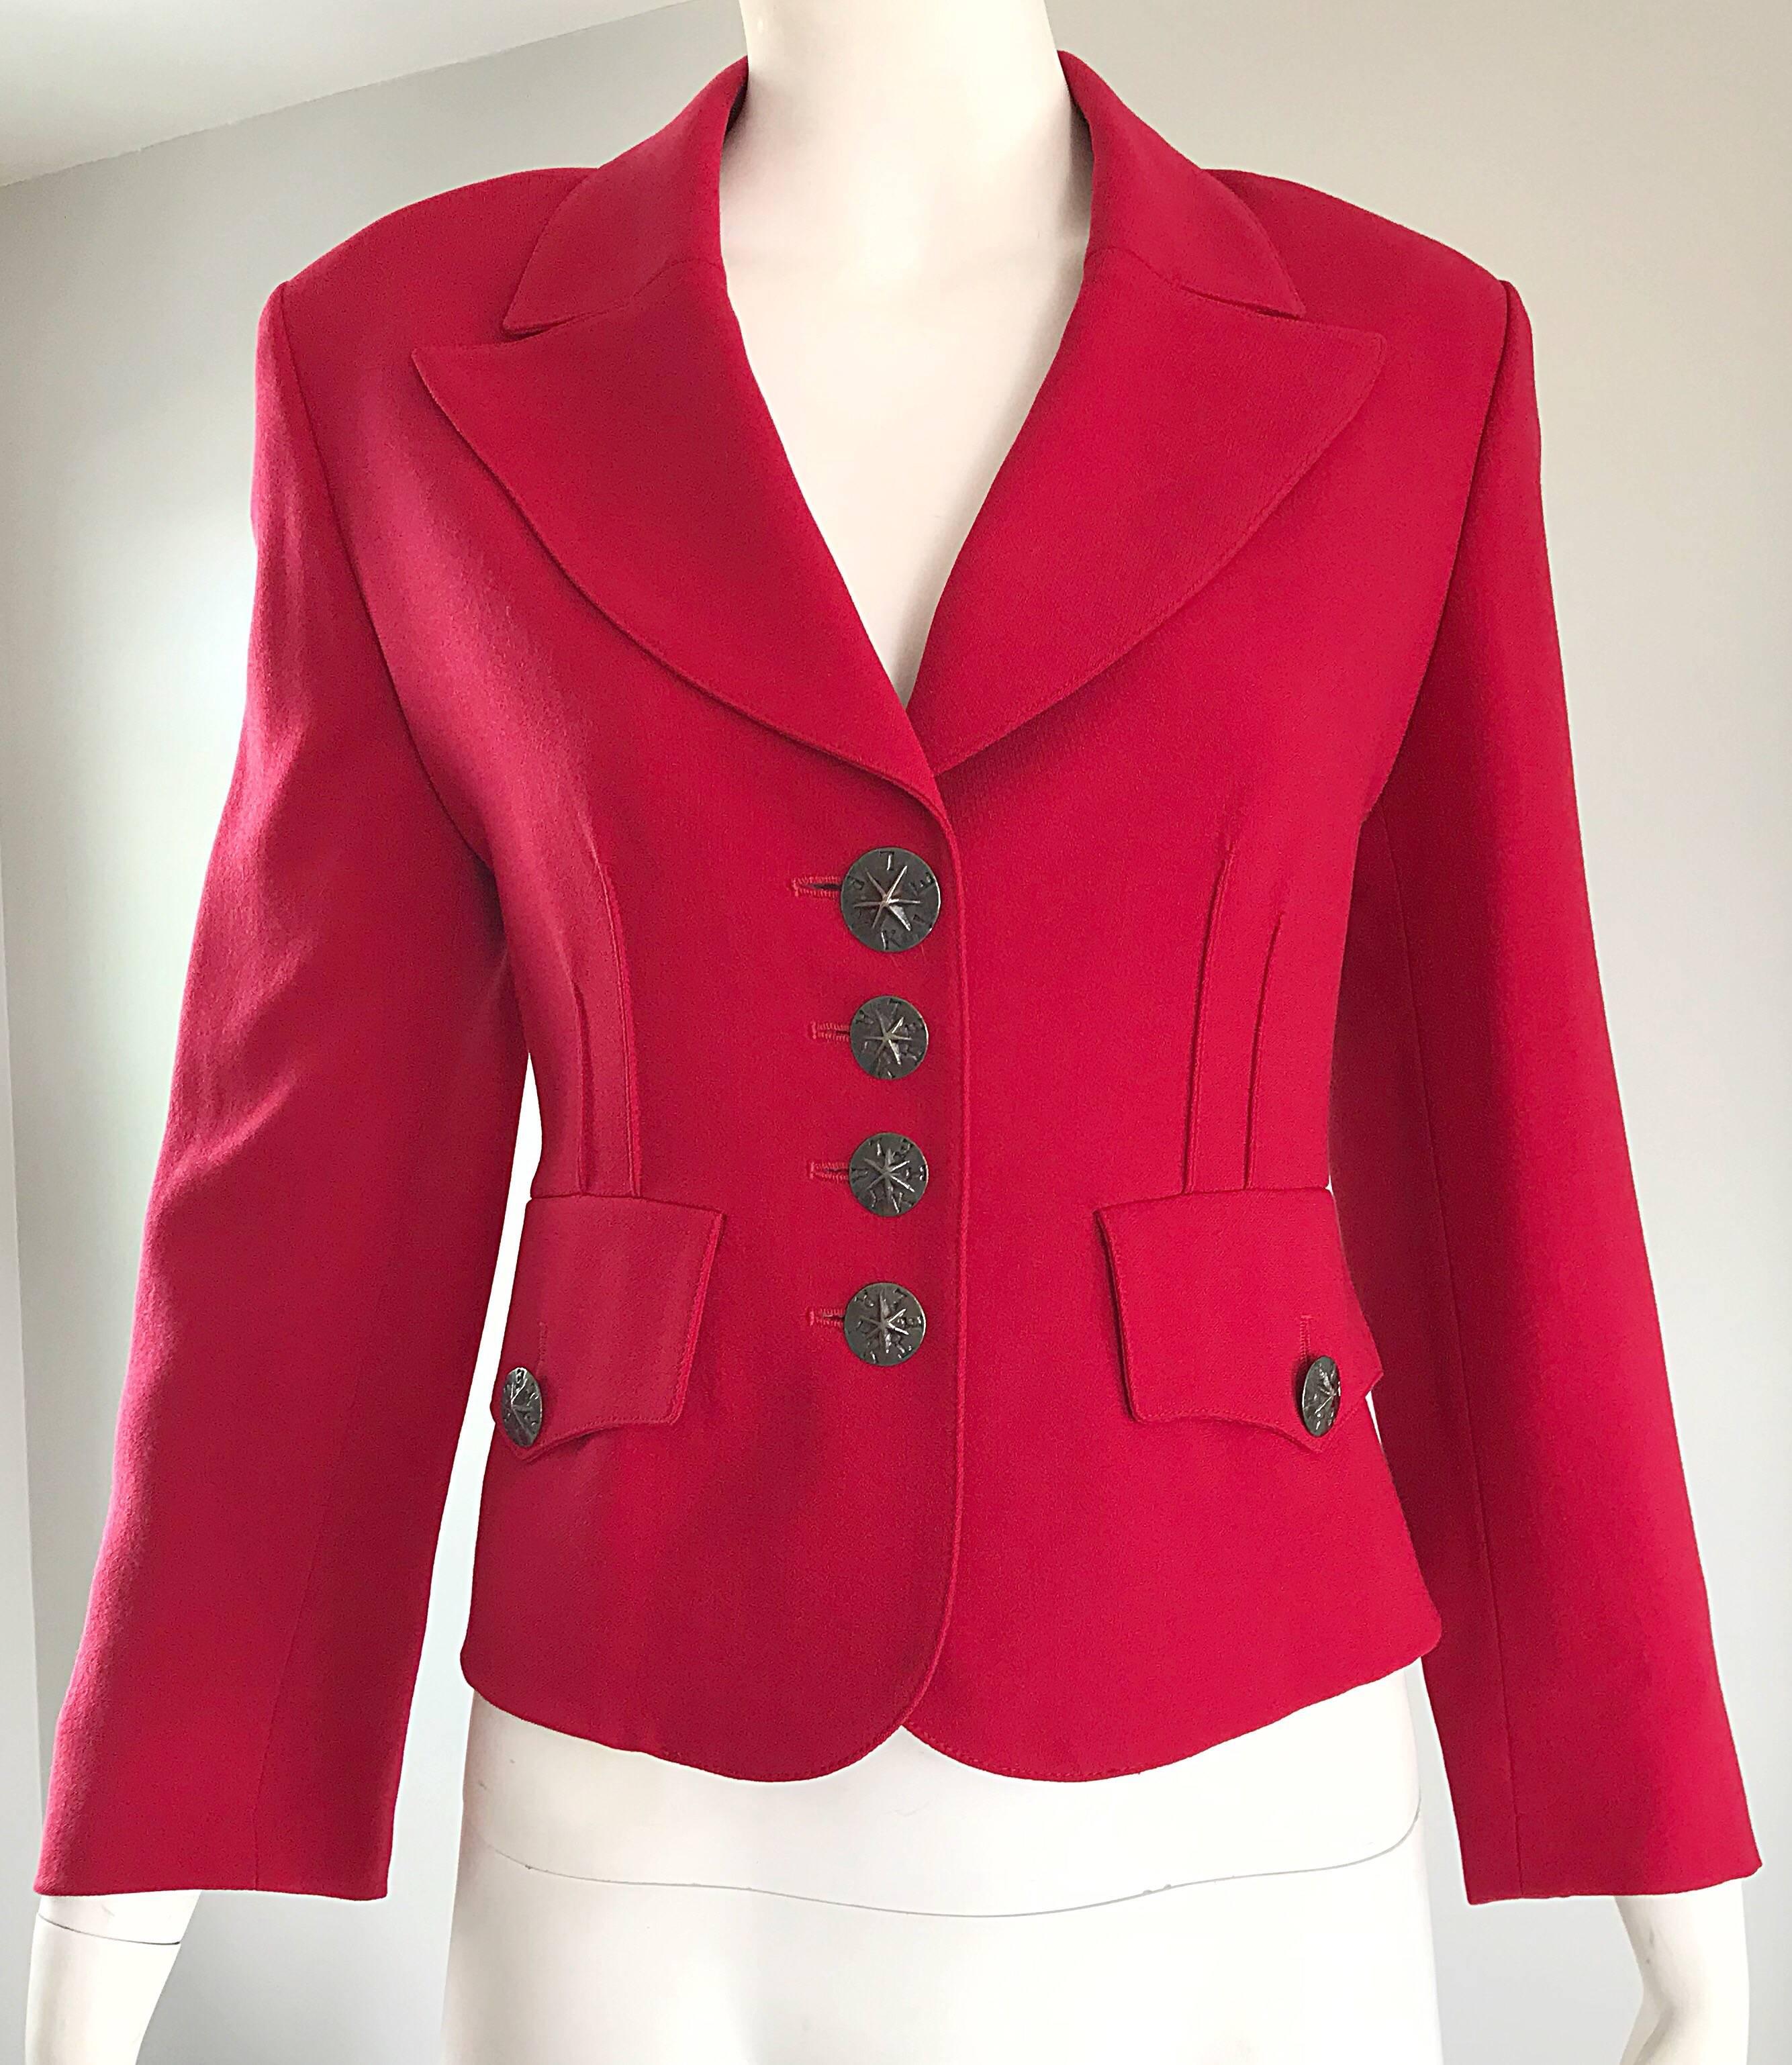 Vintage Sonia Rykiel 1990s Does 40s Sz 40 Lipstick Red Cropped 90s ...